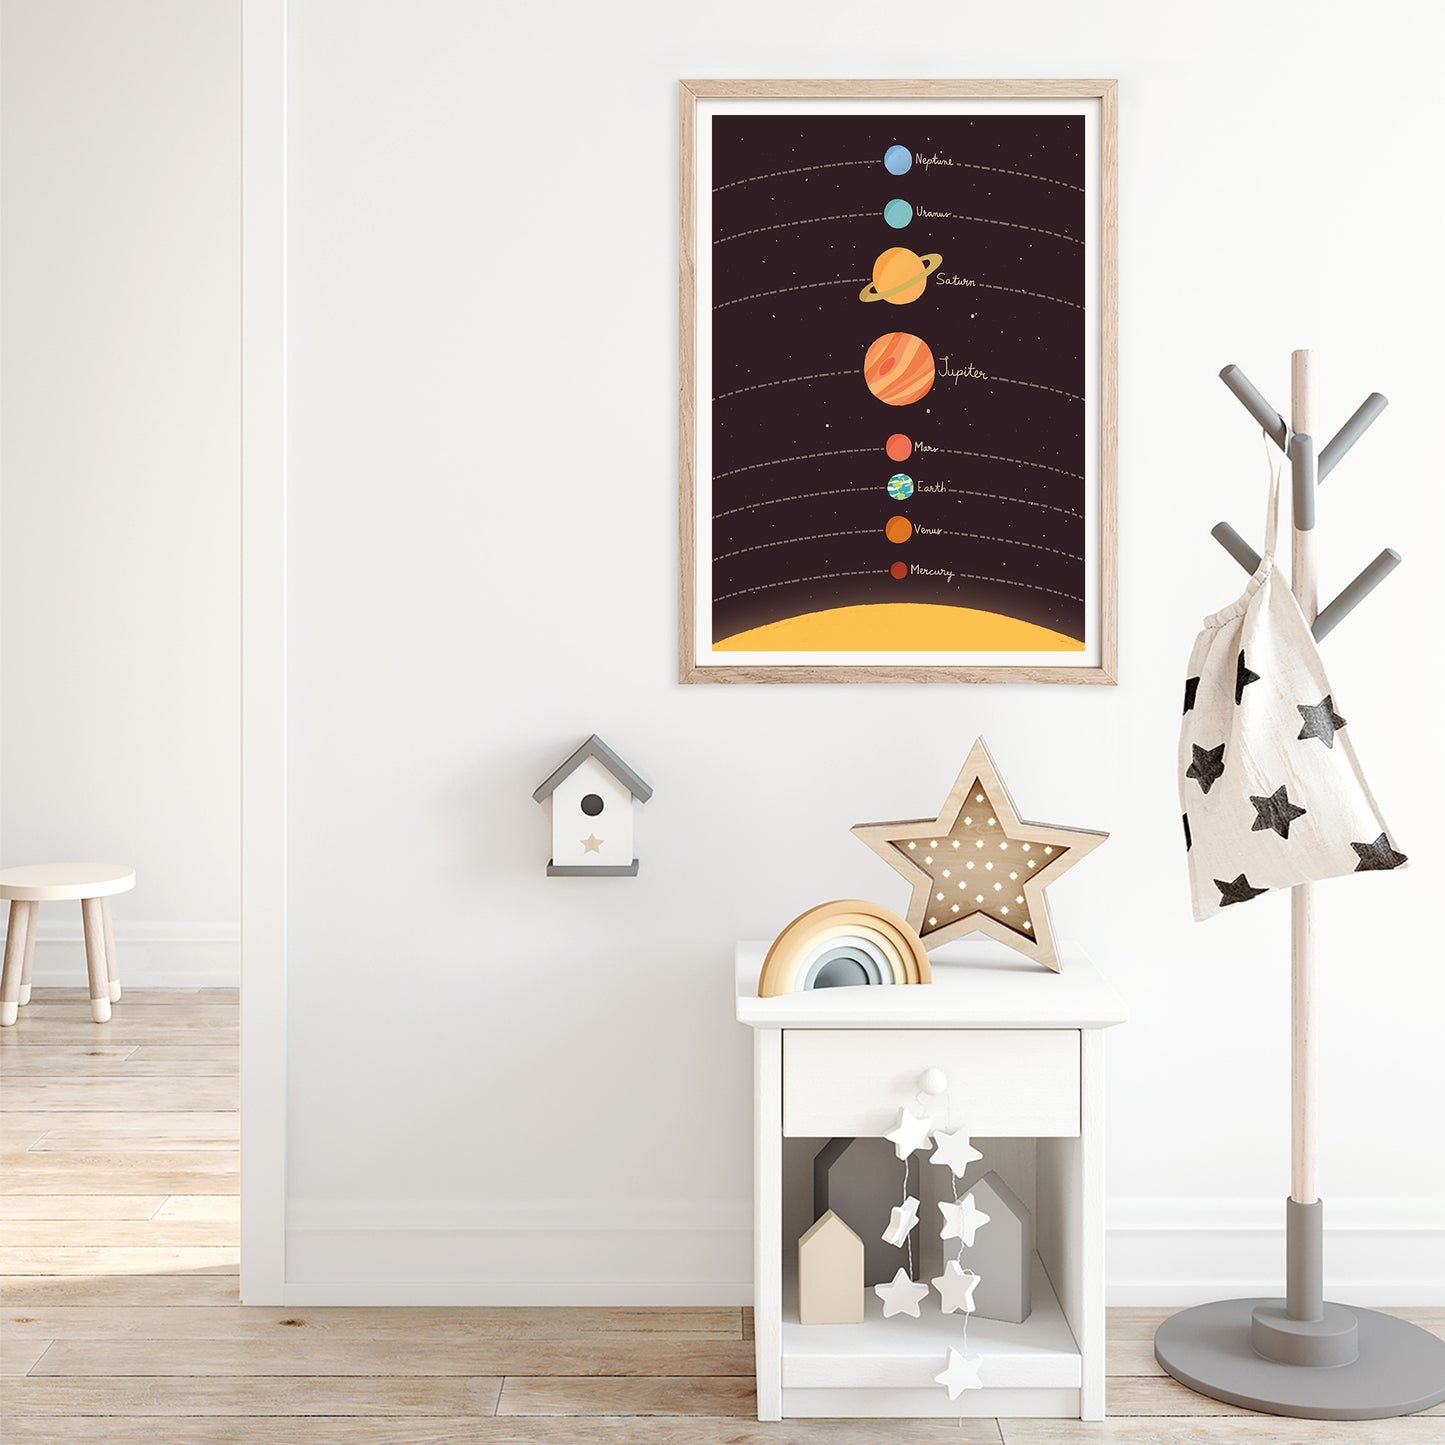 Planets of the solar system print